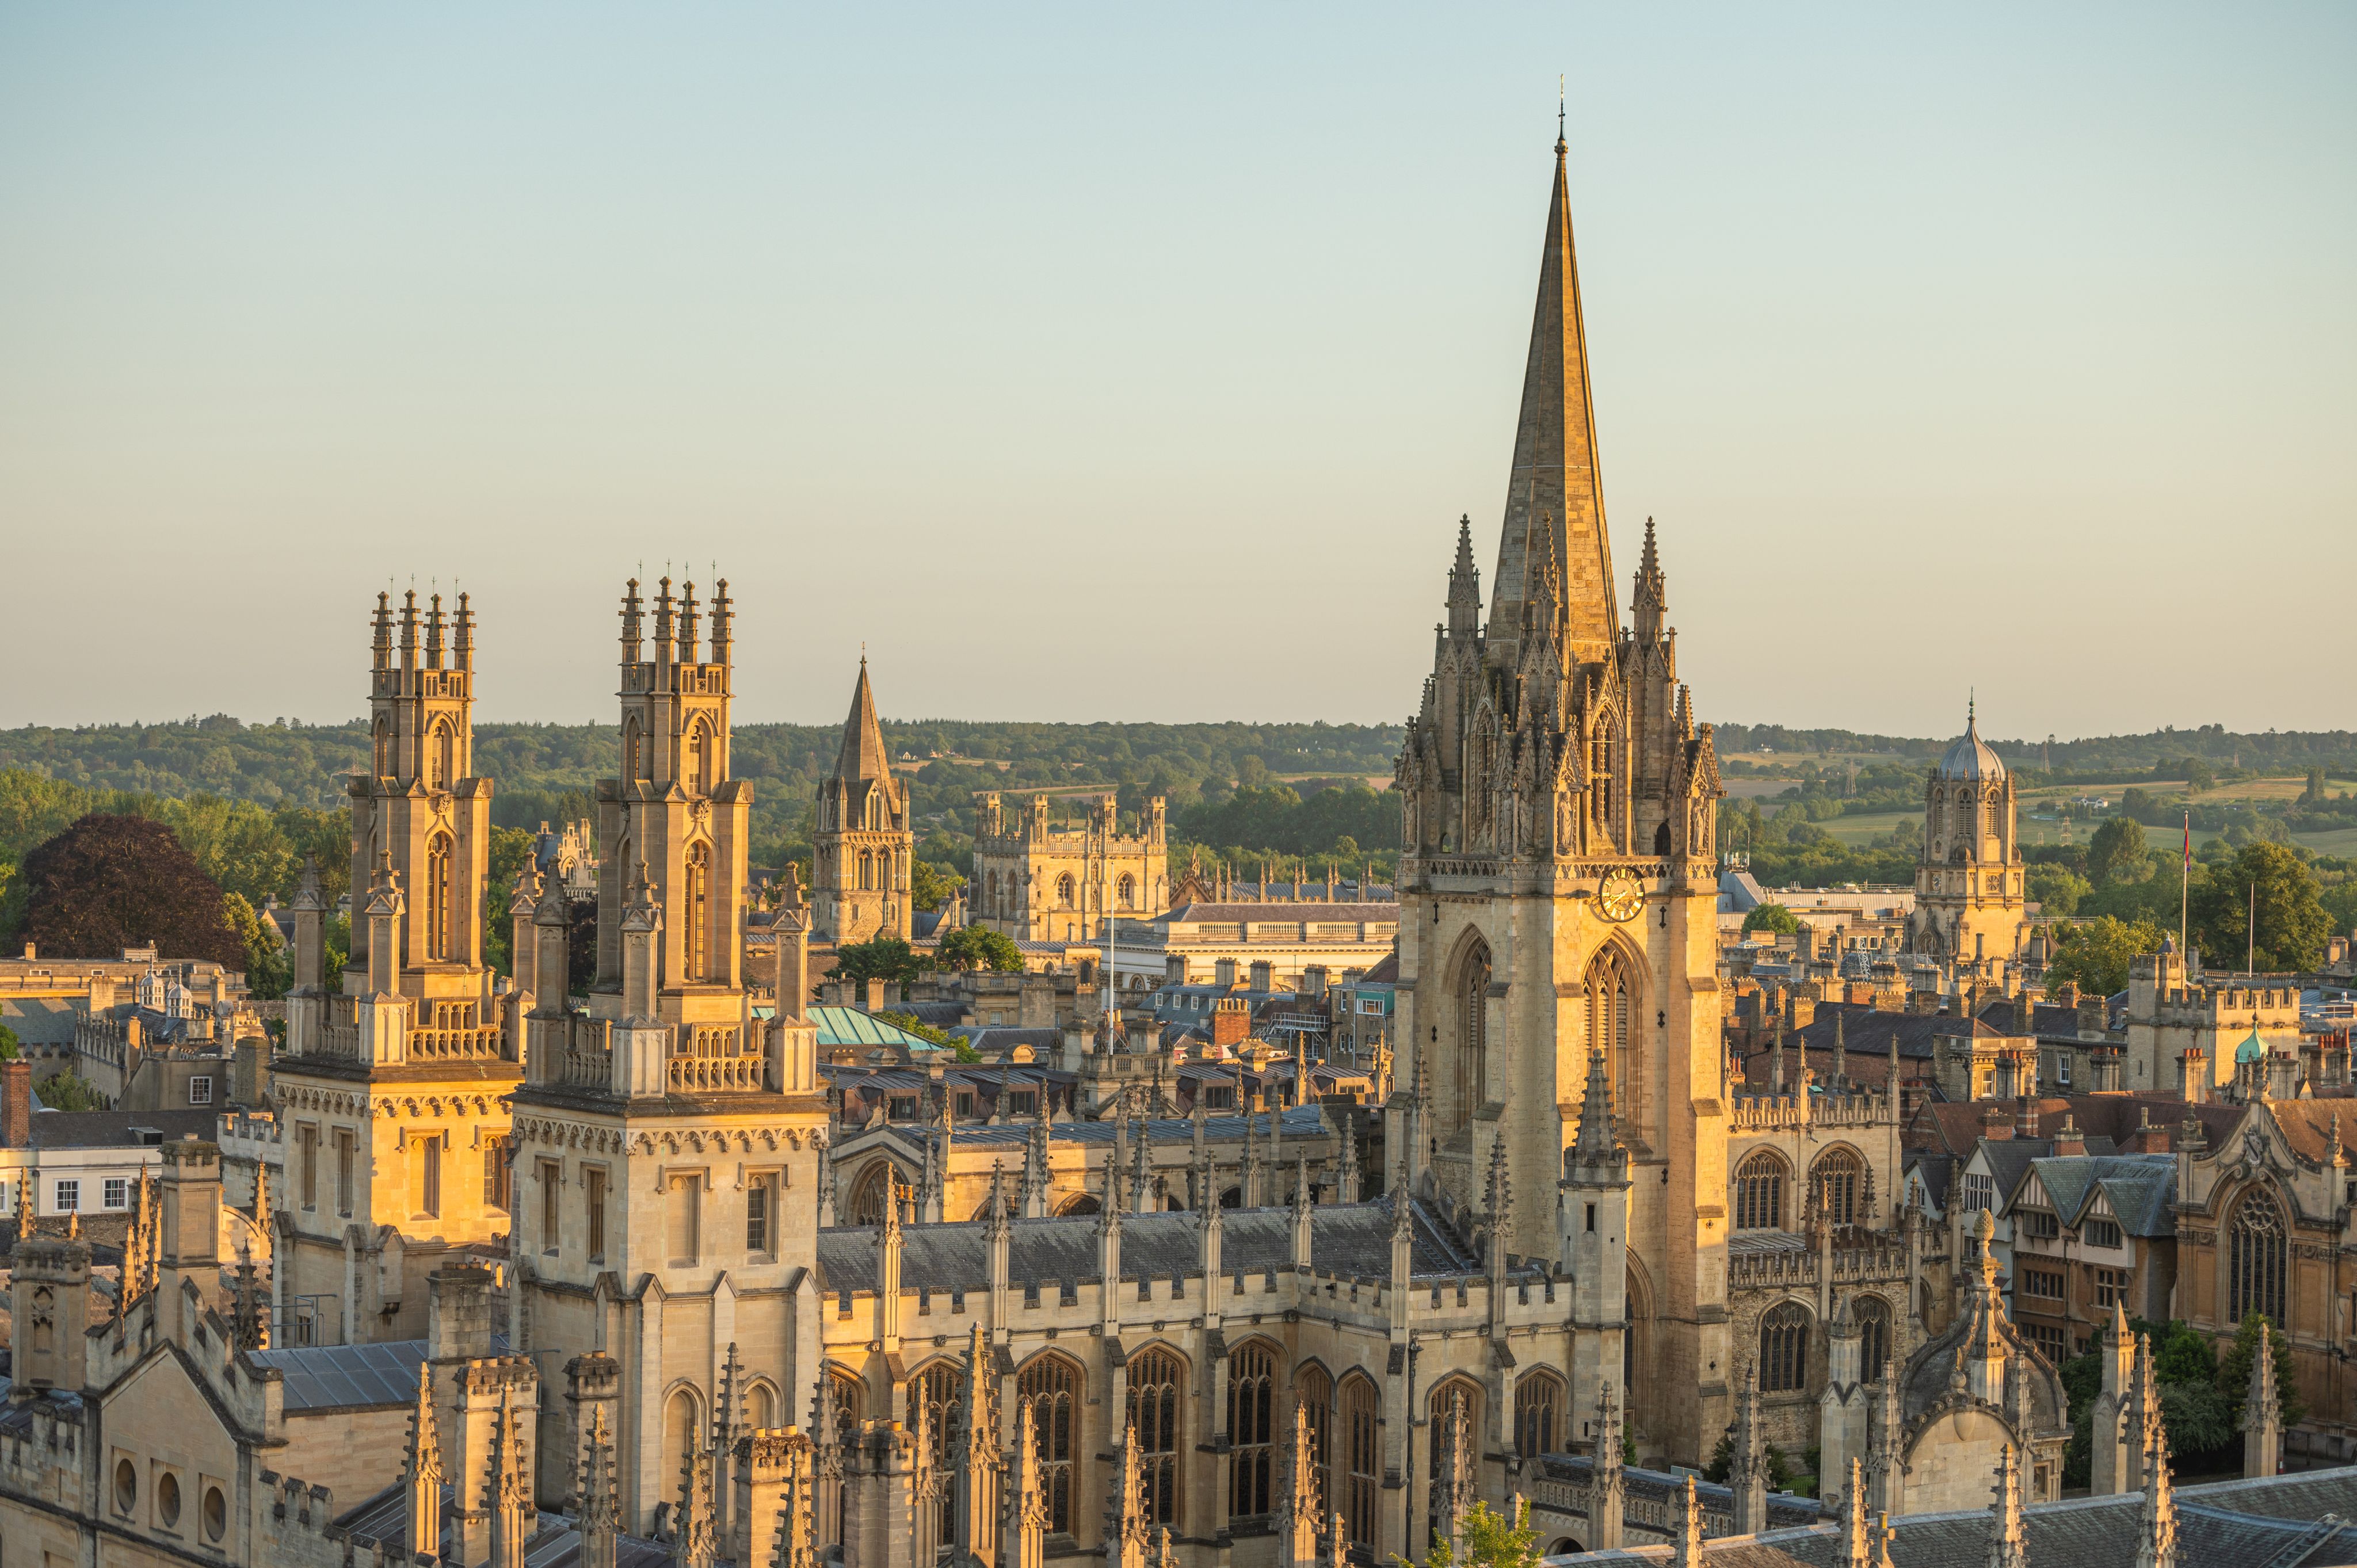 Image of the Oxford skyline